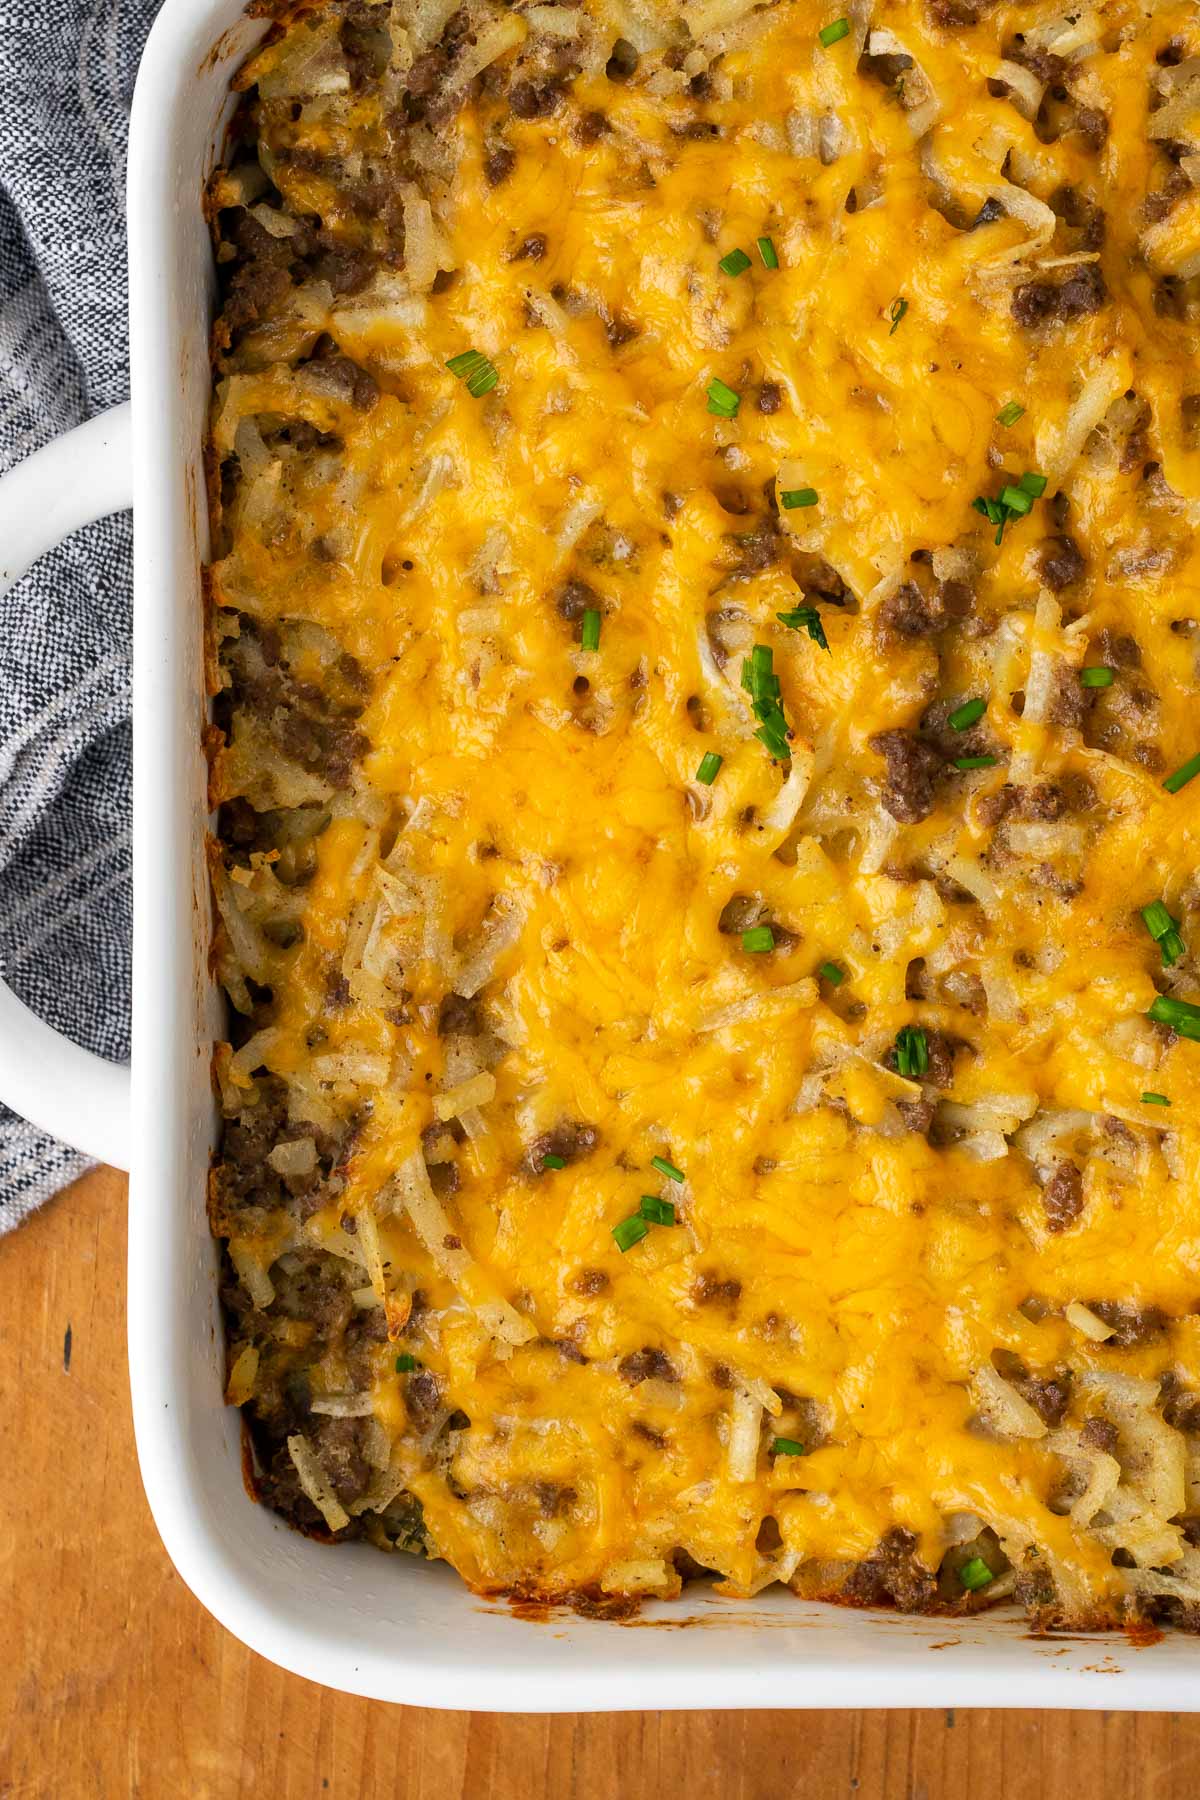 Hashbrown casserole with ground beef and melted cheese shown in a white baking dish.